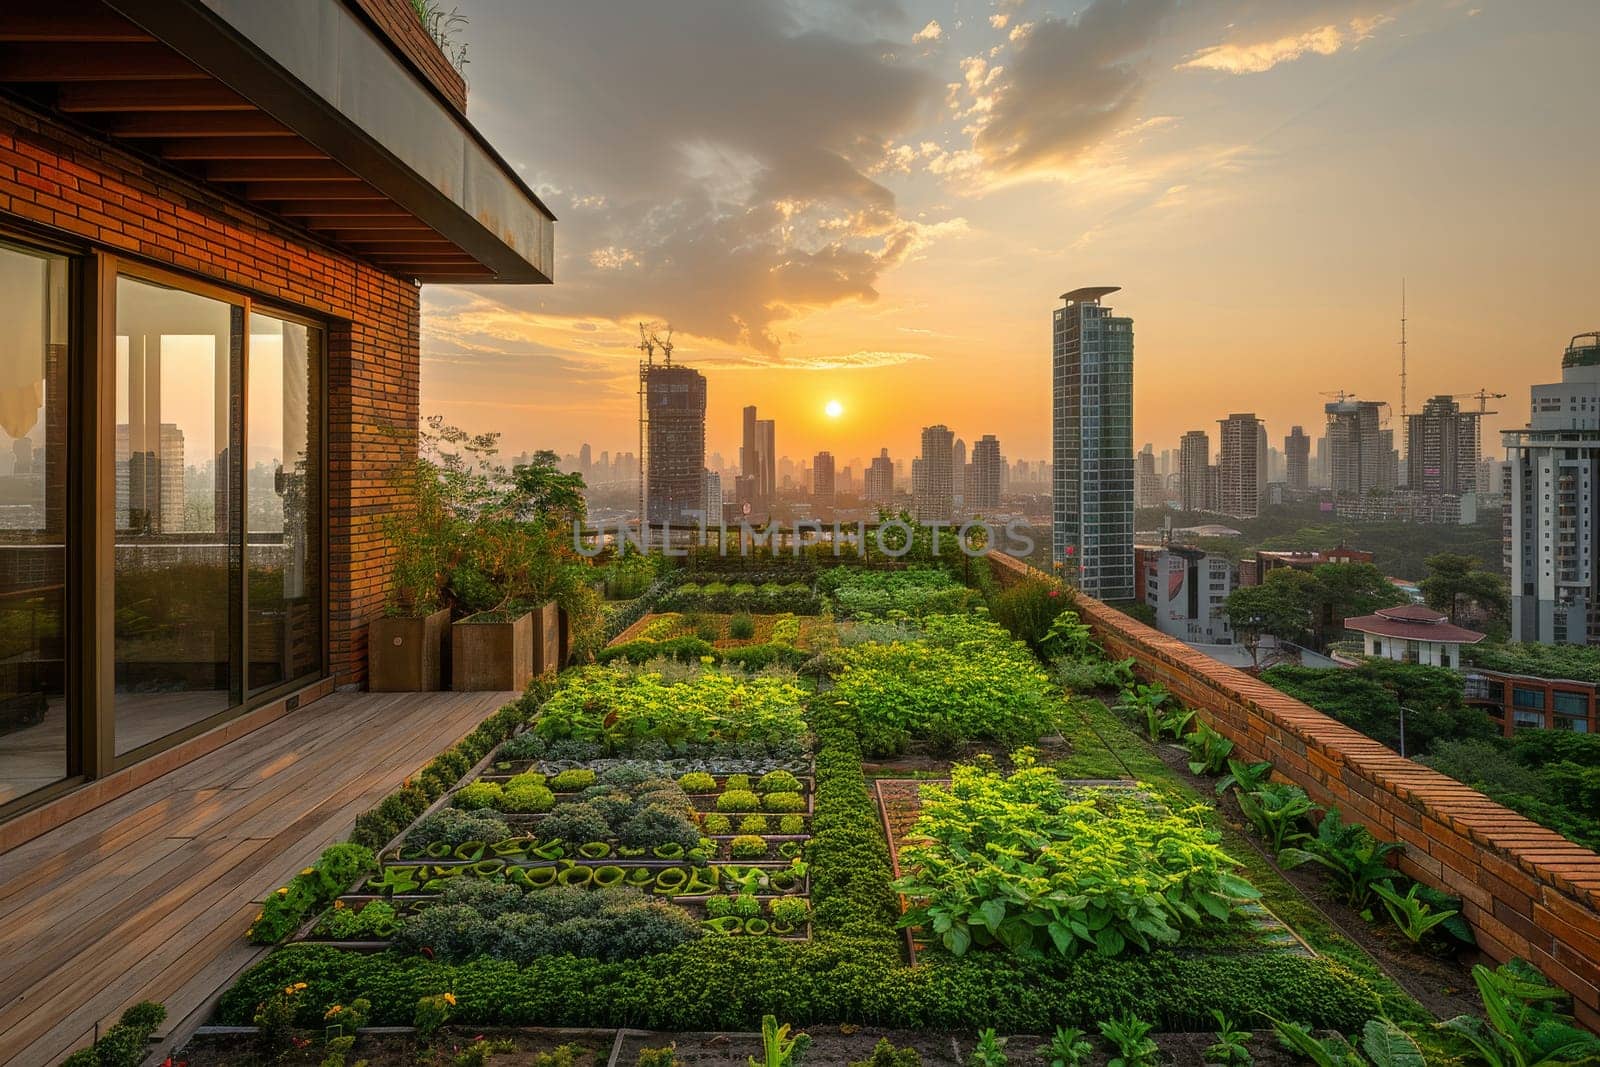 A rooftop garden with a view of the city and a sunset by itchaznong